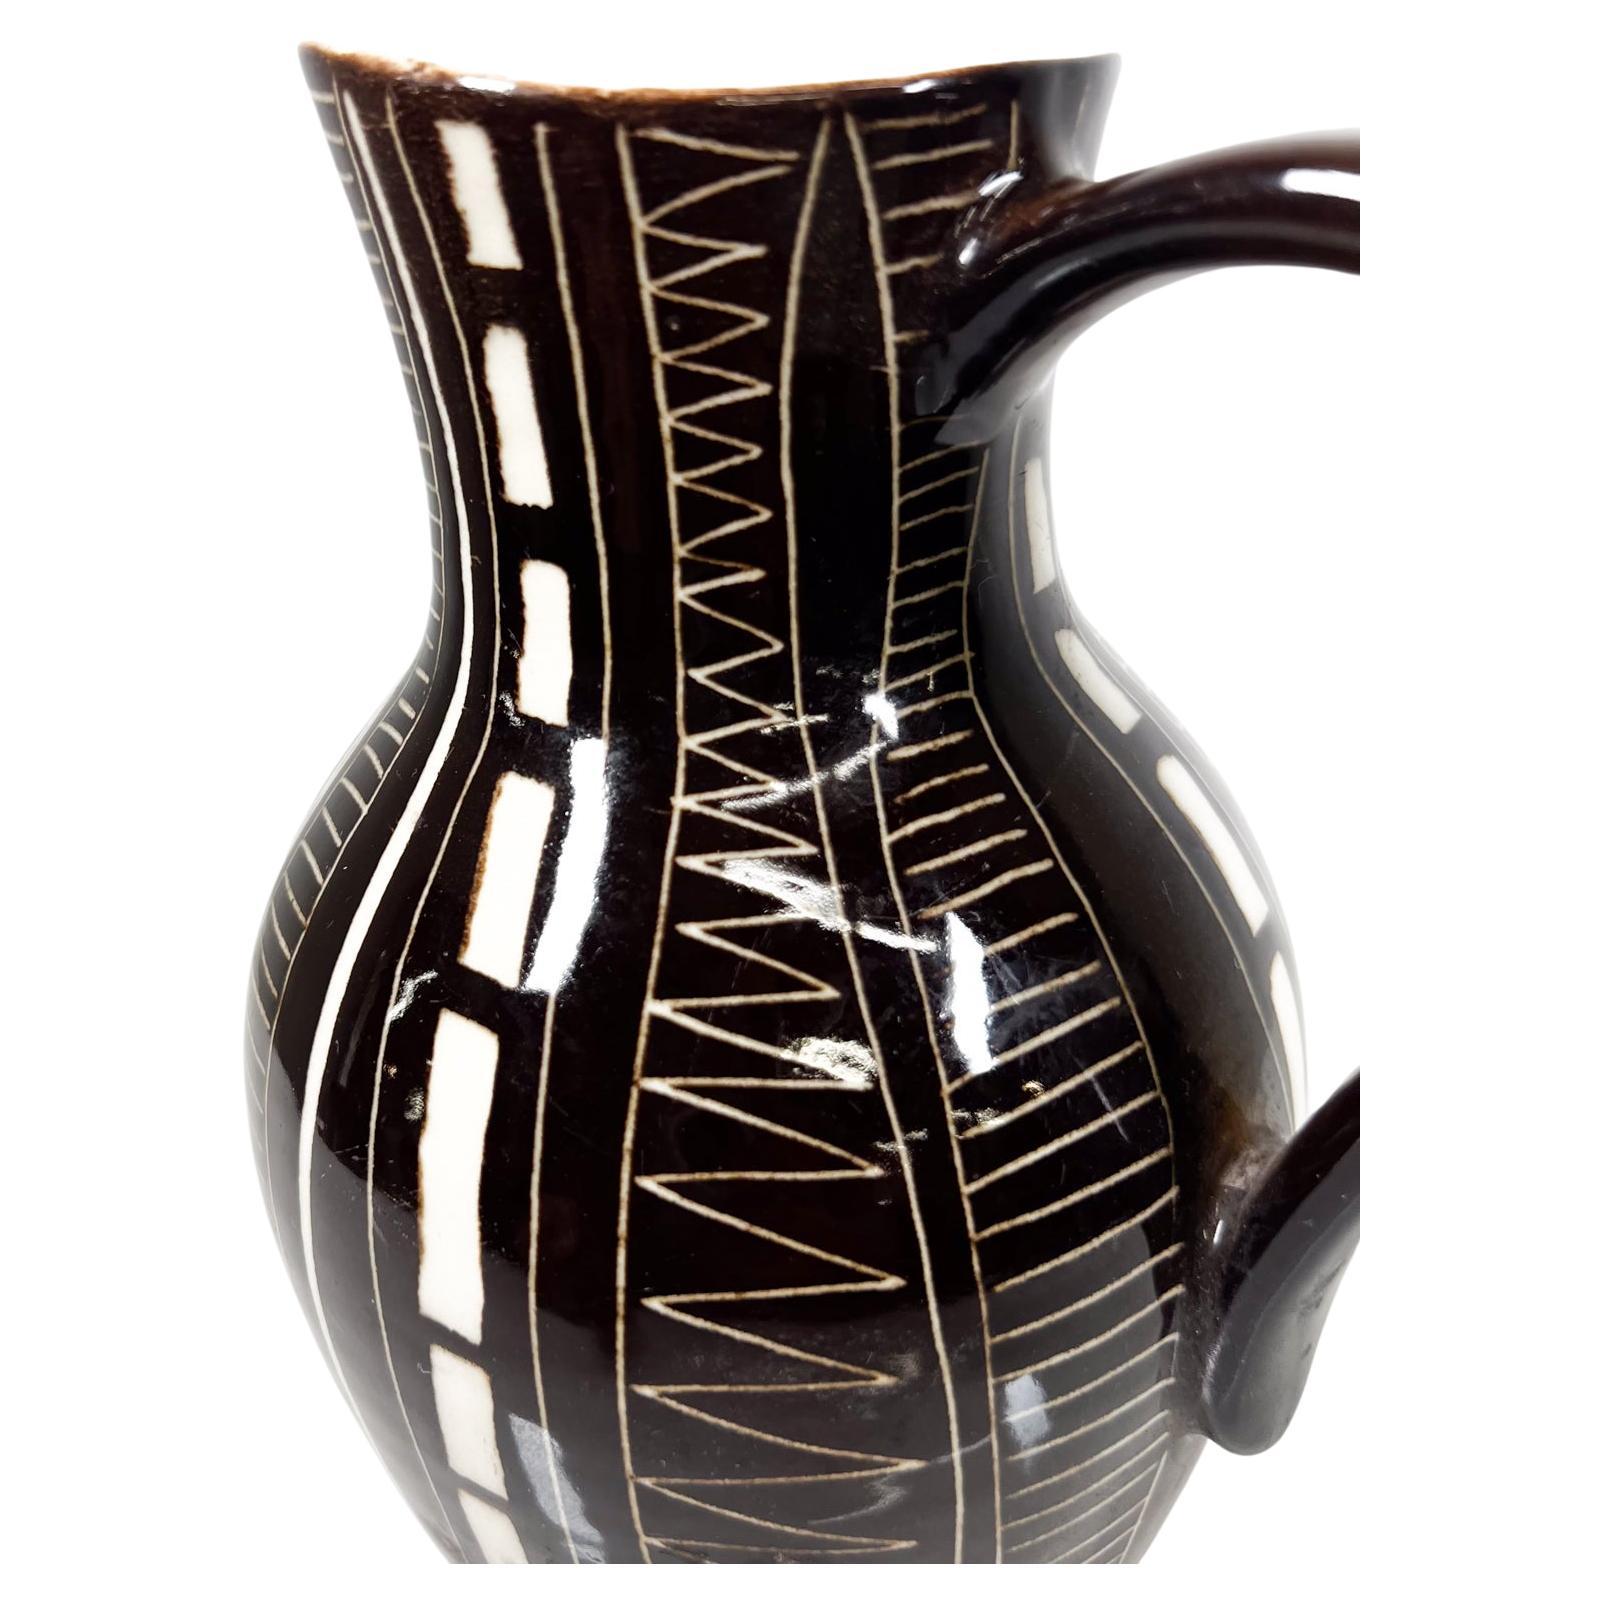 Elegant Kaj Franck Pitcher Arabia abstract form dark brown with relief pattern.
6 d x 4.38 w x 6.88 h
Kaj Franck ARABIA Pitcher KF 1 Finland
Signed
Preowned vintage condition.
See images provided.

